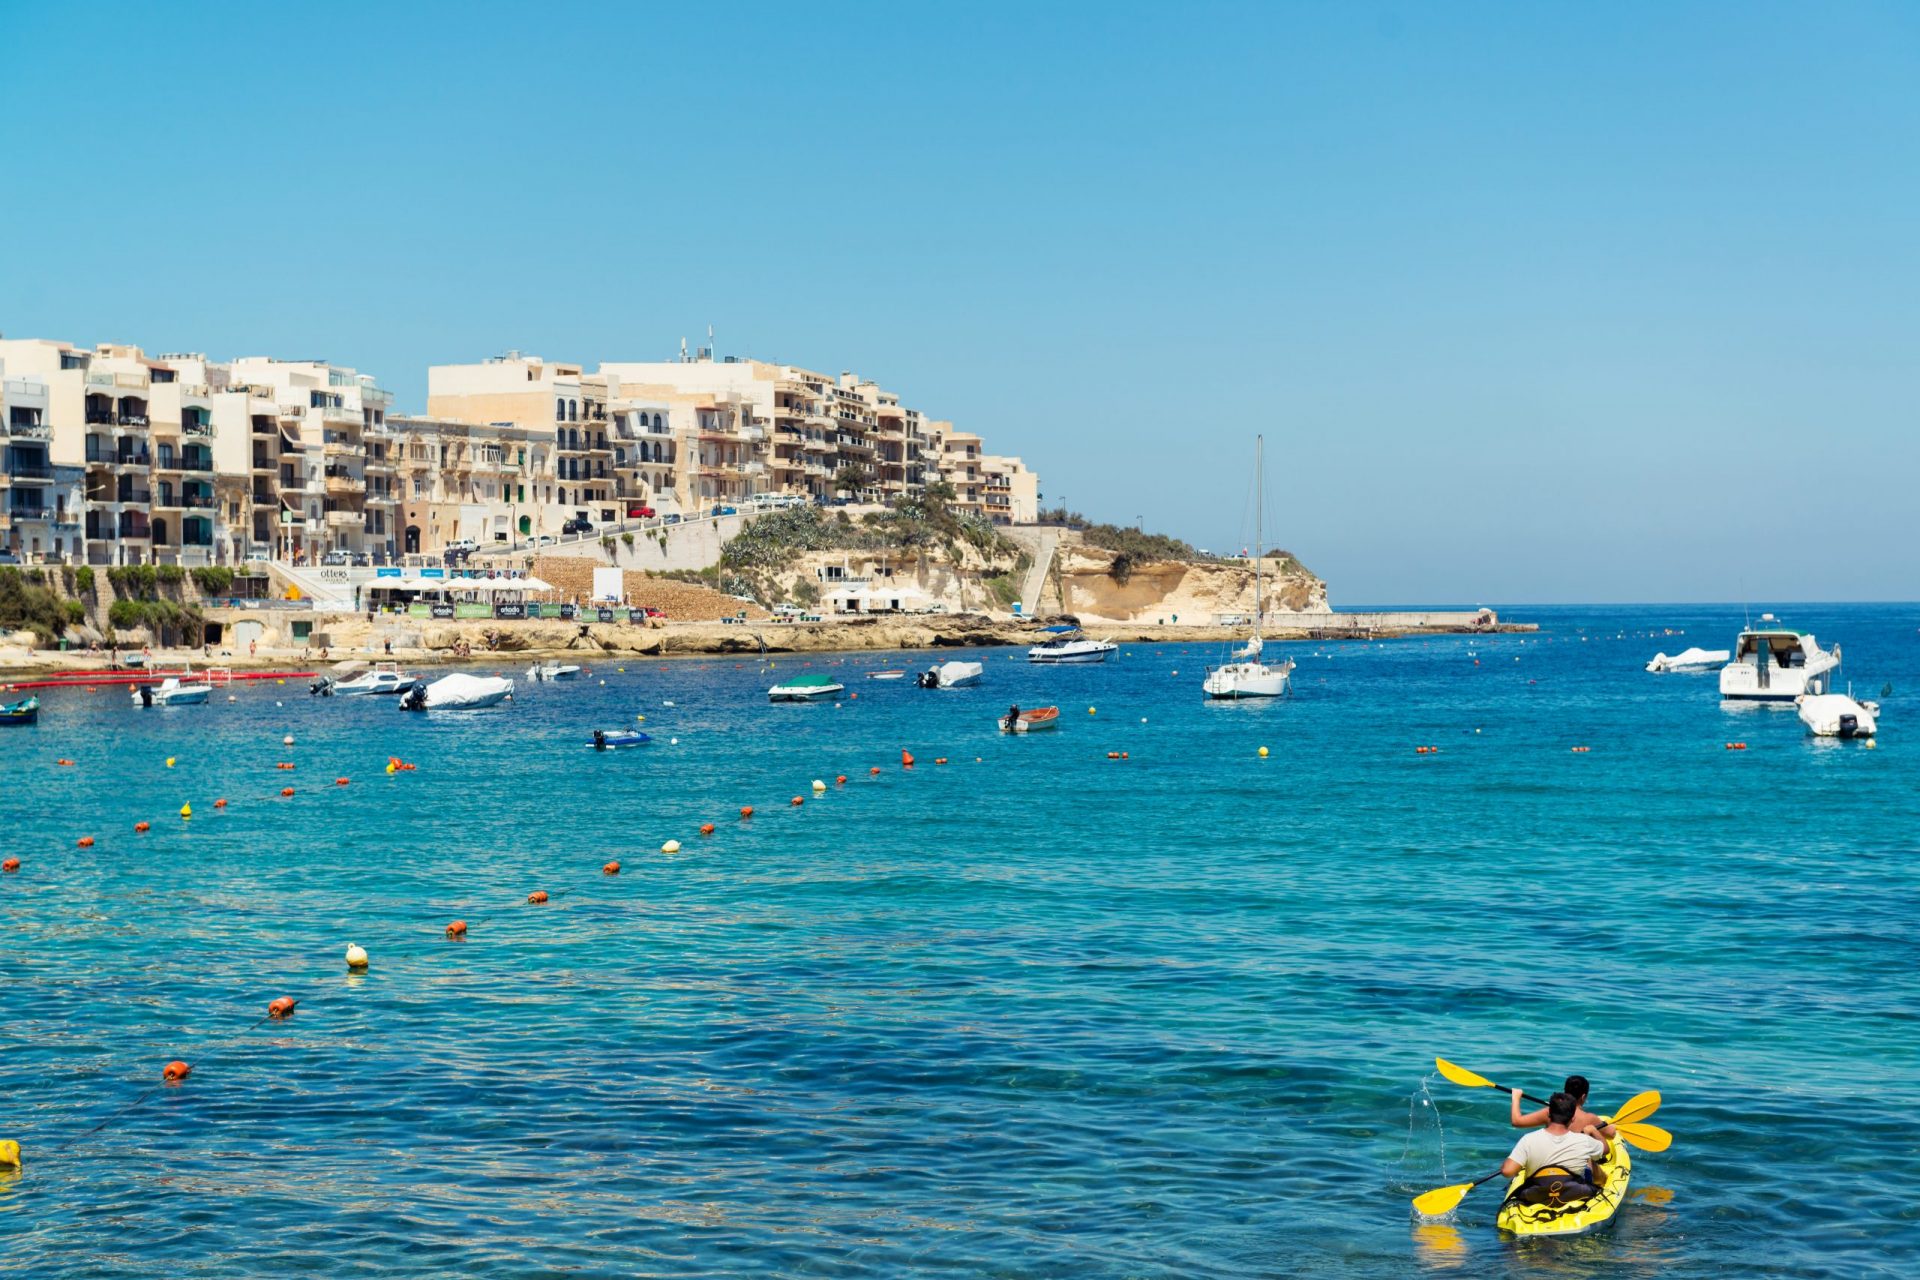 <p>From Marsalforn, you can also enjoy boat trips to beautiful coves and caves. You may spot dolphins on your way.</p> <p>The average price of a night in an Airbnb in Marsalforn (according to Time Out): is €65 ($70).</p>